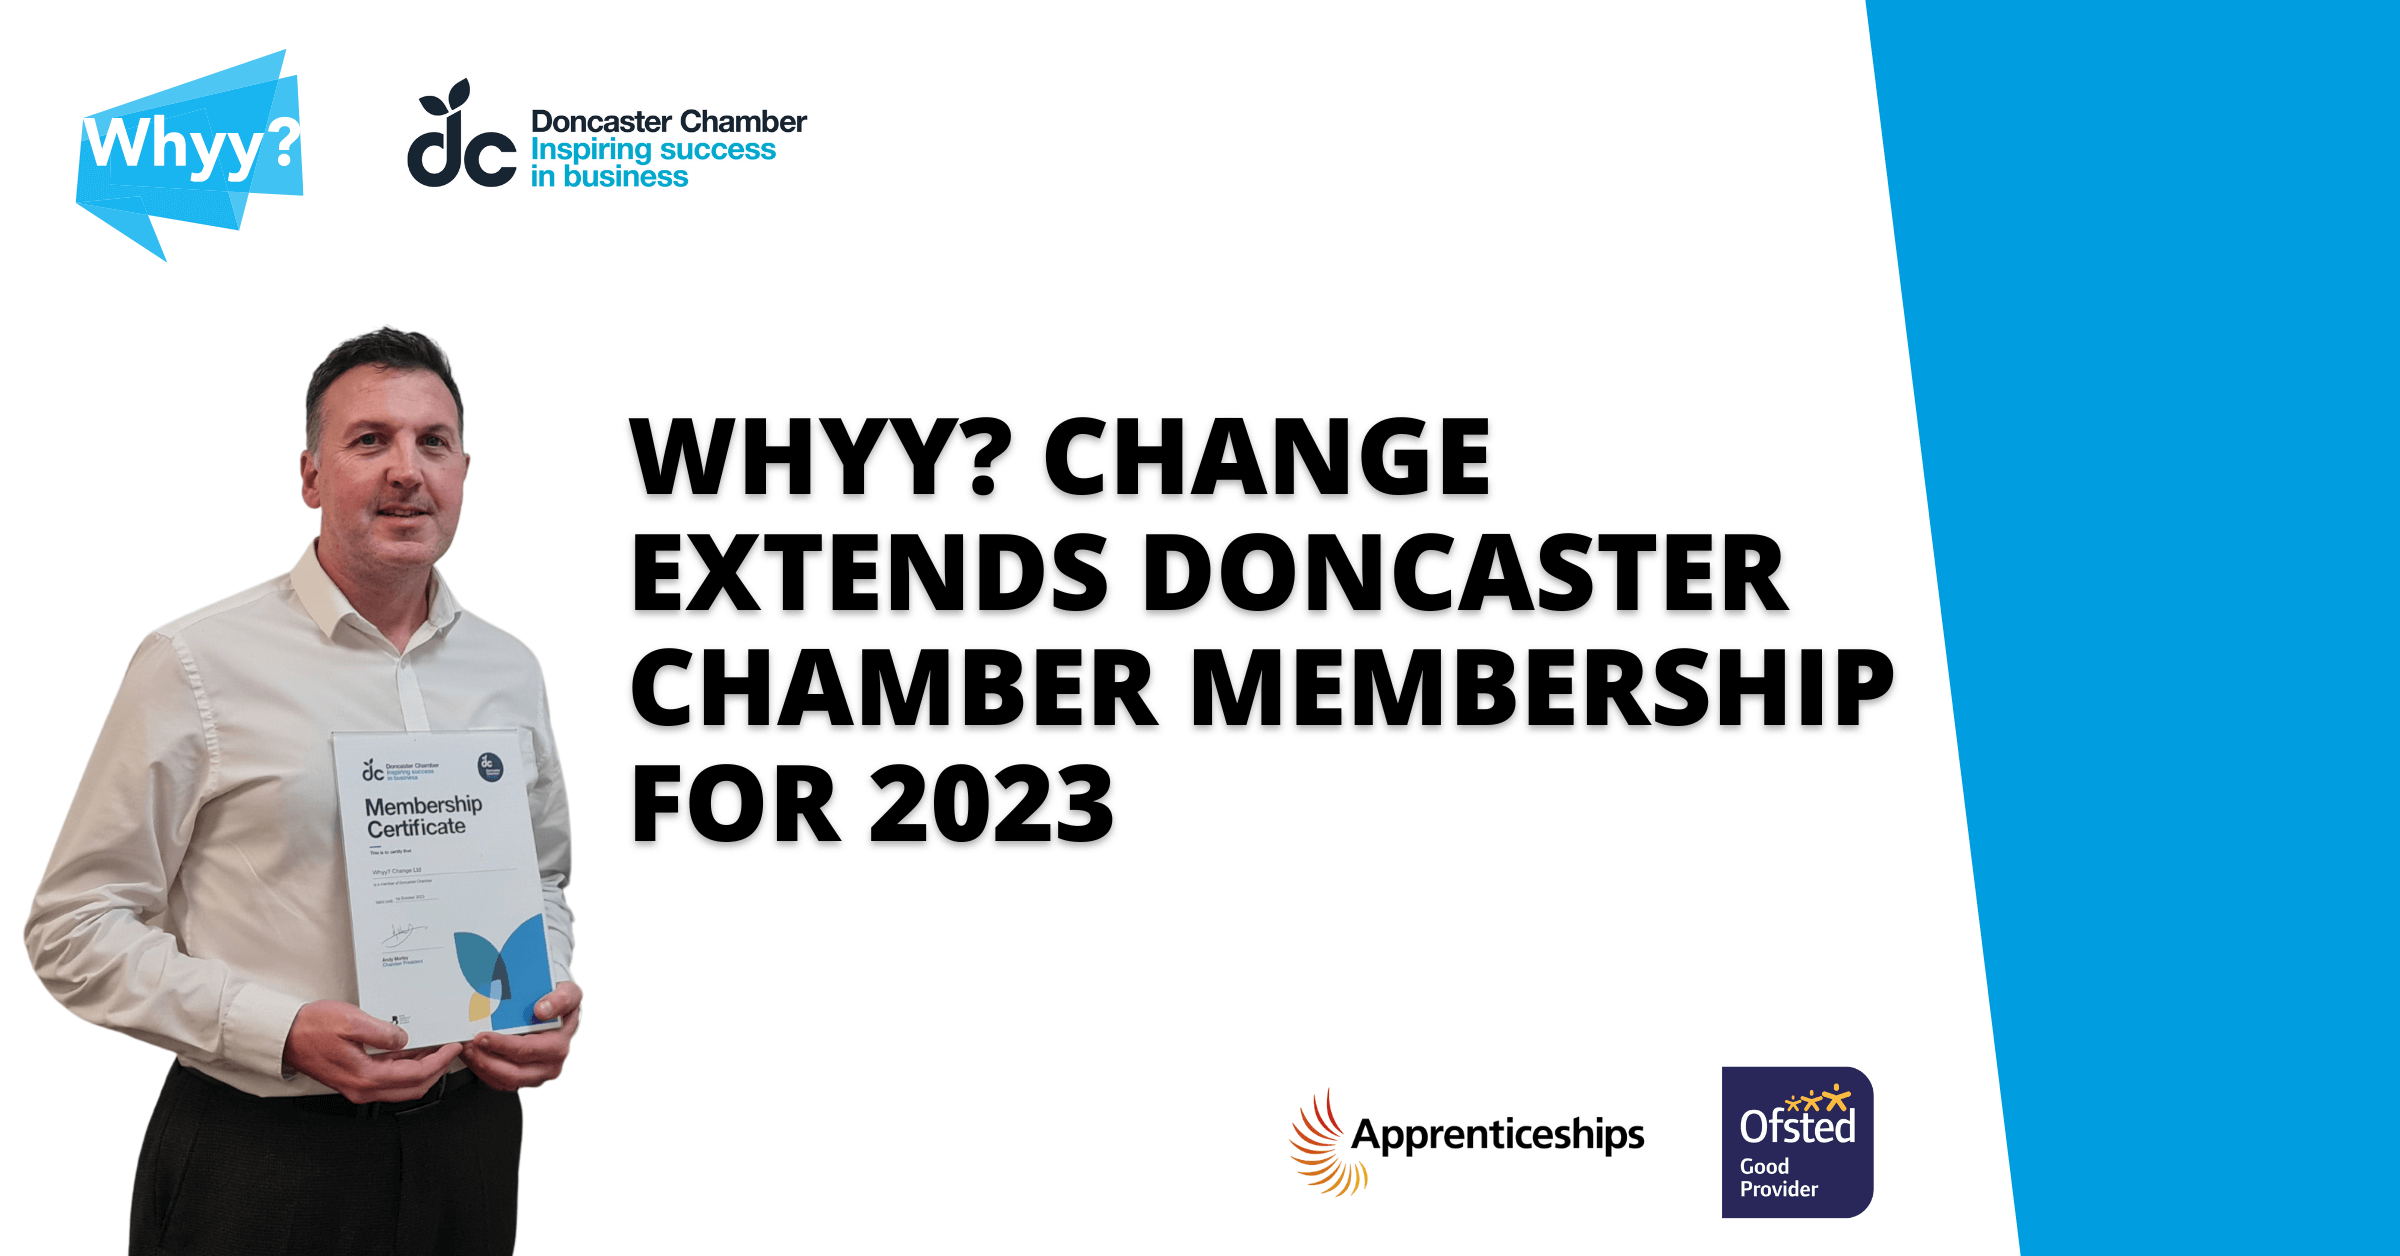 Doncaster Chamber Membership - Whyy? Change